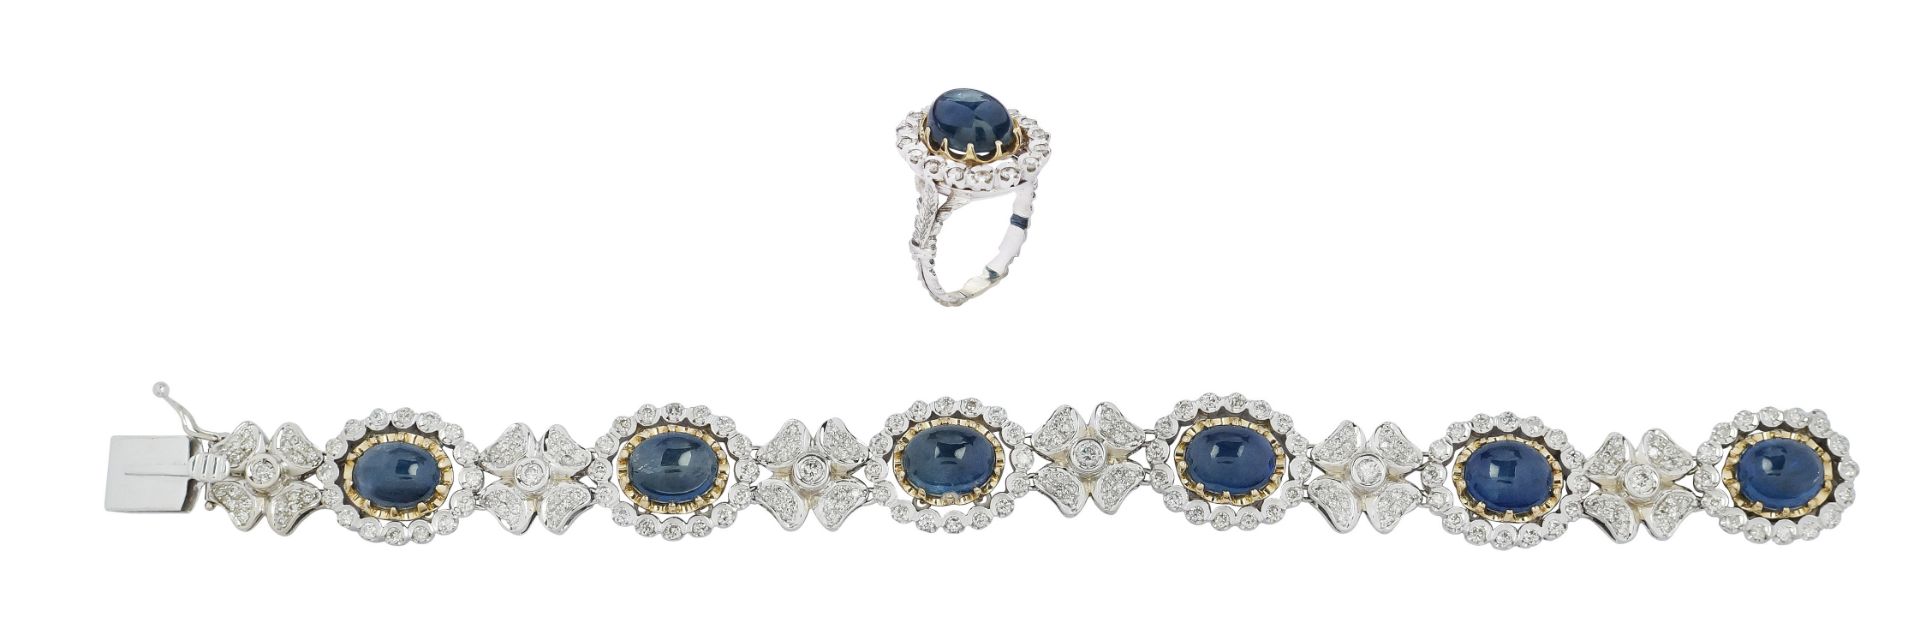 A sapphire and diamond bracelet with ring (2)